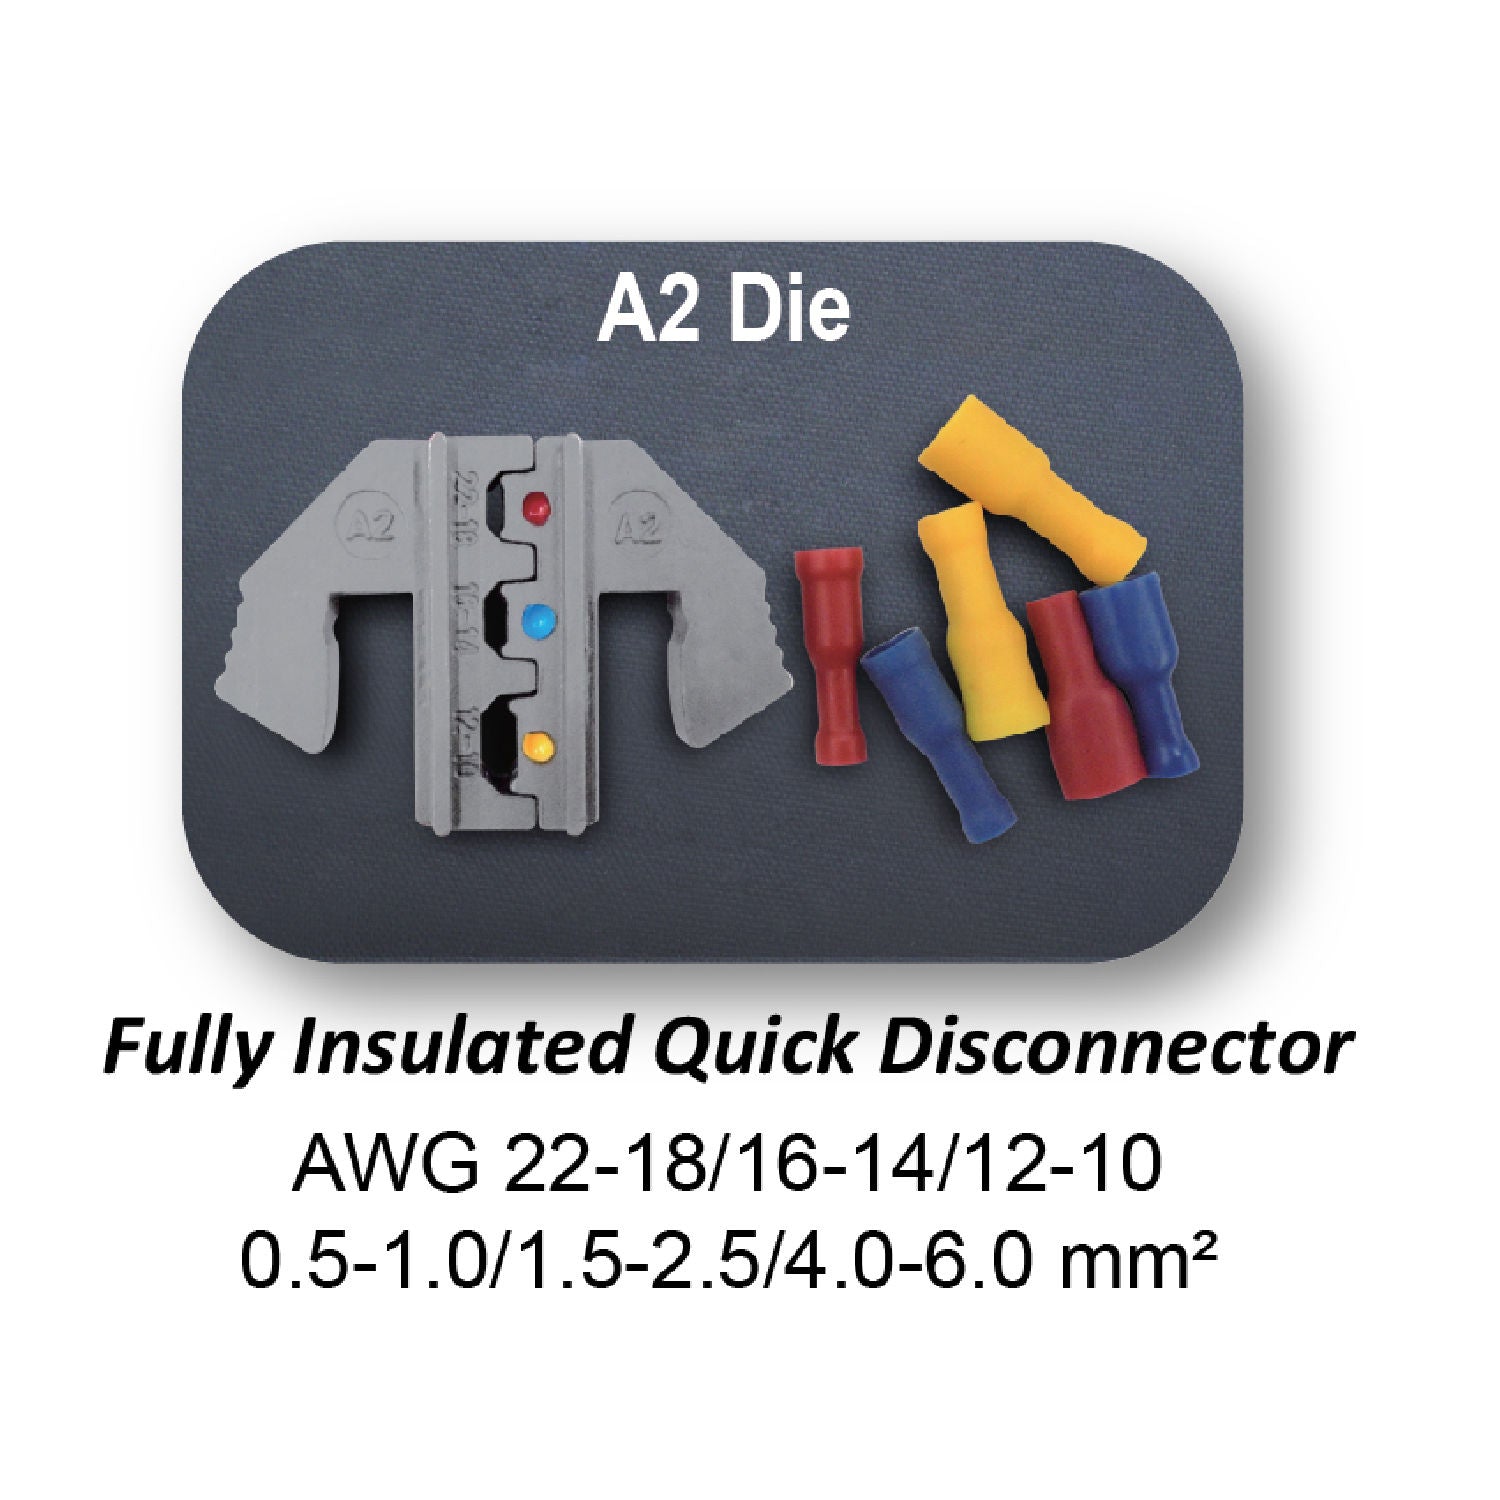 Crimping Tool Die - A2 Die for Fully Insulated Quick Disconnectors - Tool Guy Republic